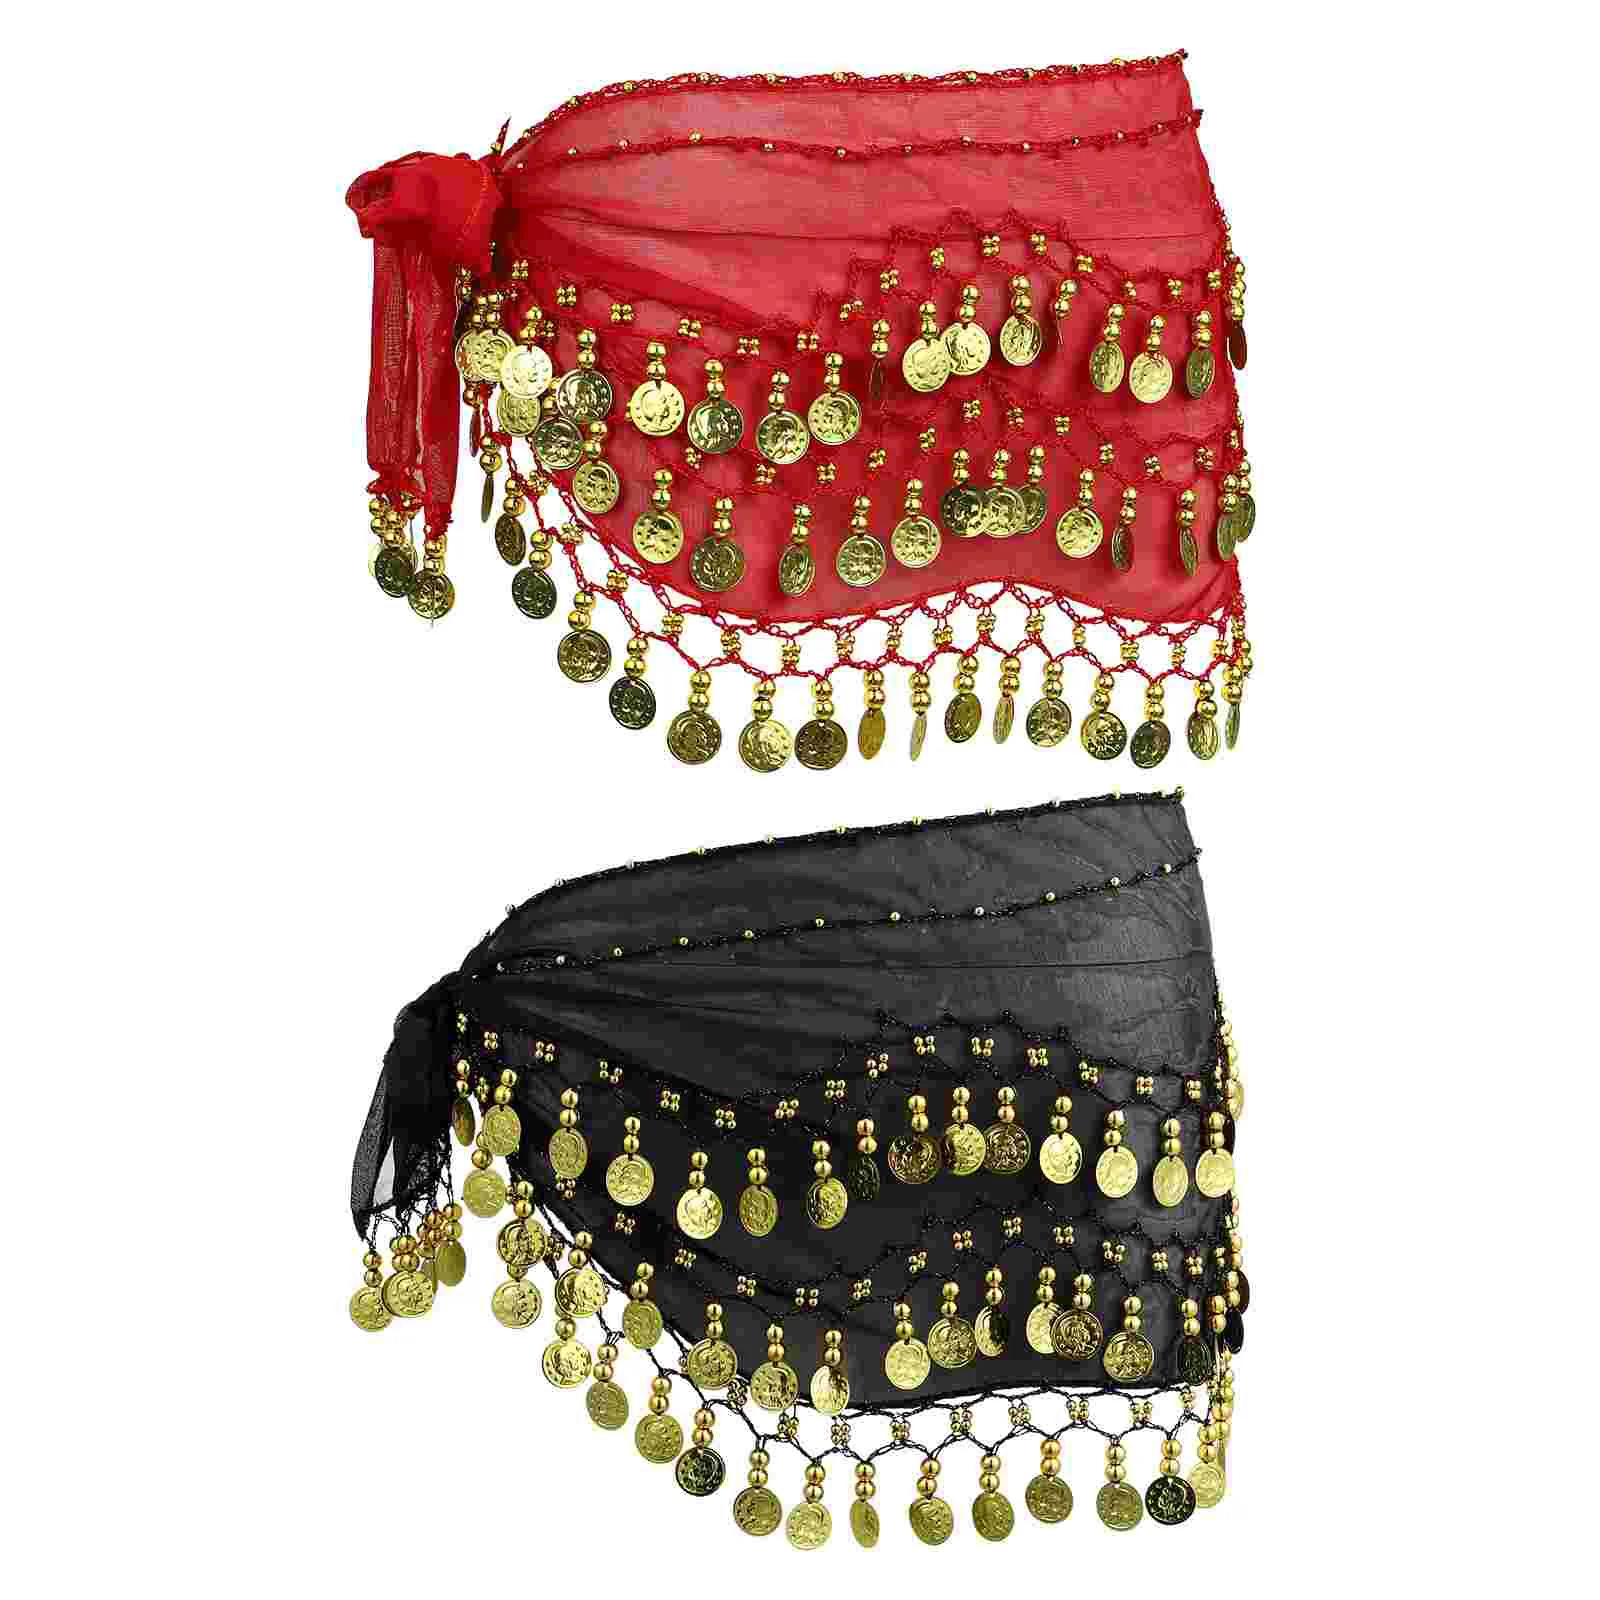 

2Pcs Belly Dancing Skirt Belly Dancer Costumes For Women with Coins Chiffon Skirt Belly Dancer Costumes For Women Belt